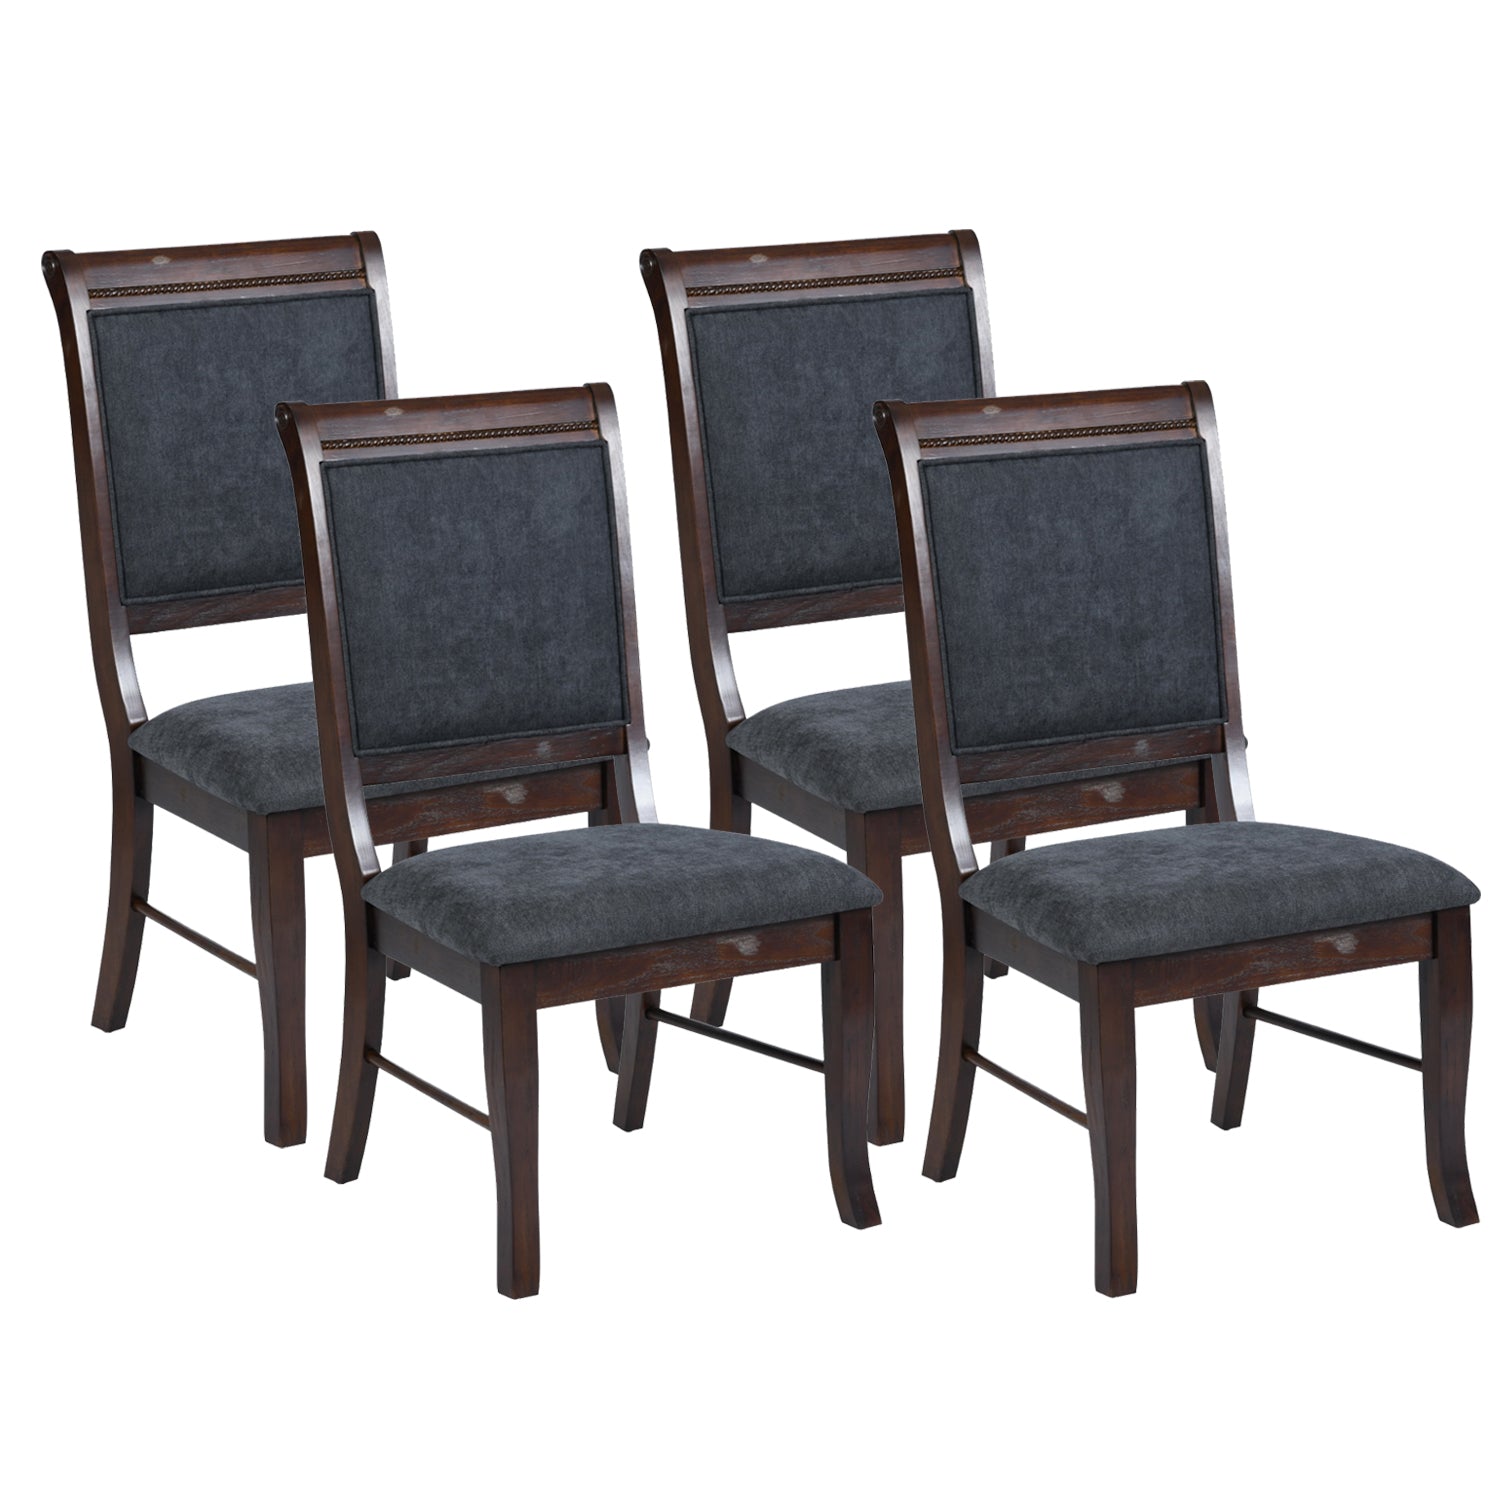 Upholstered Solid Wood Side Chair Set of 2/4